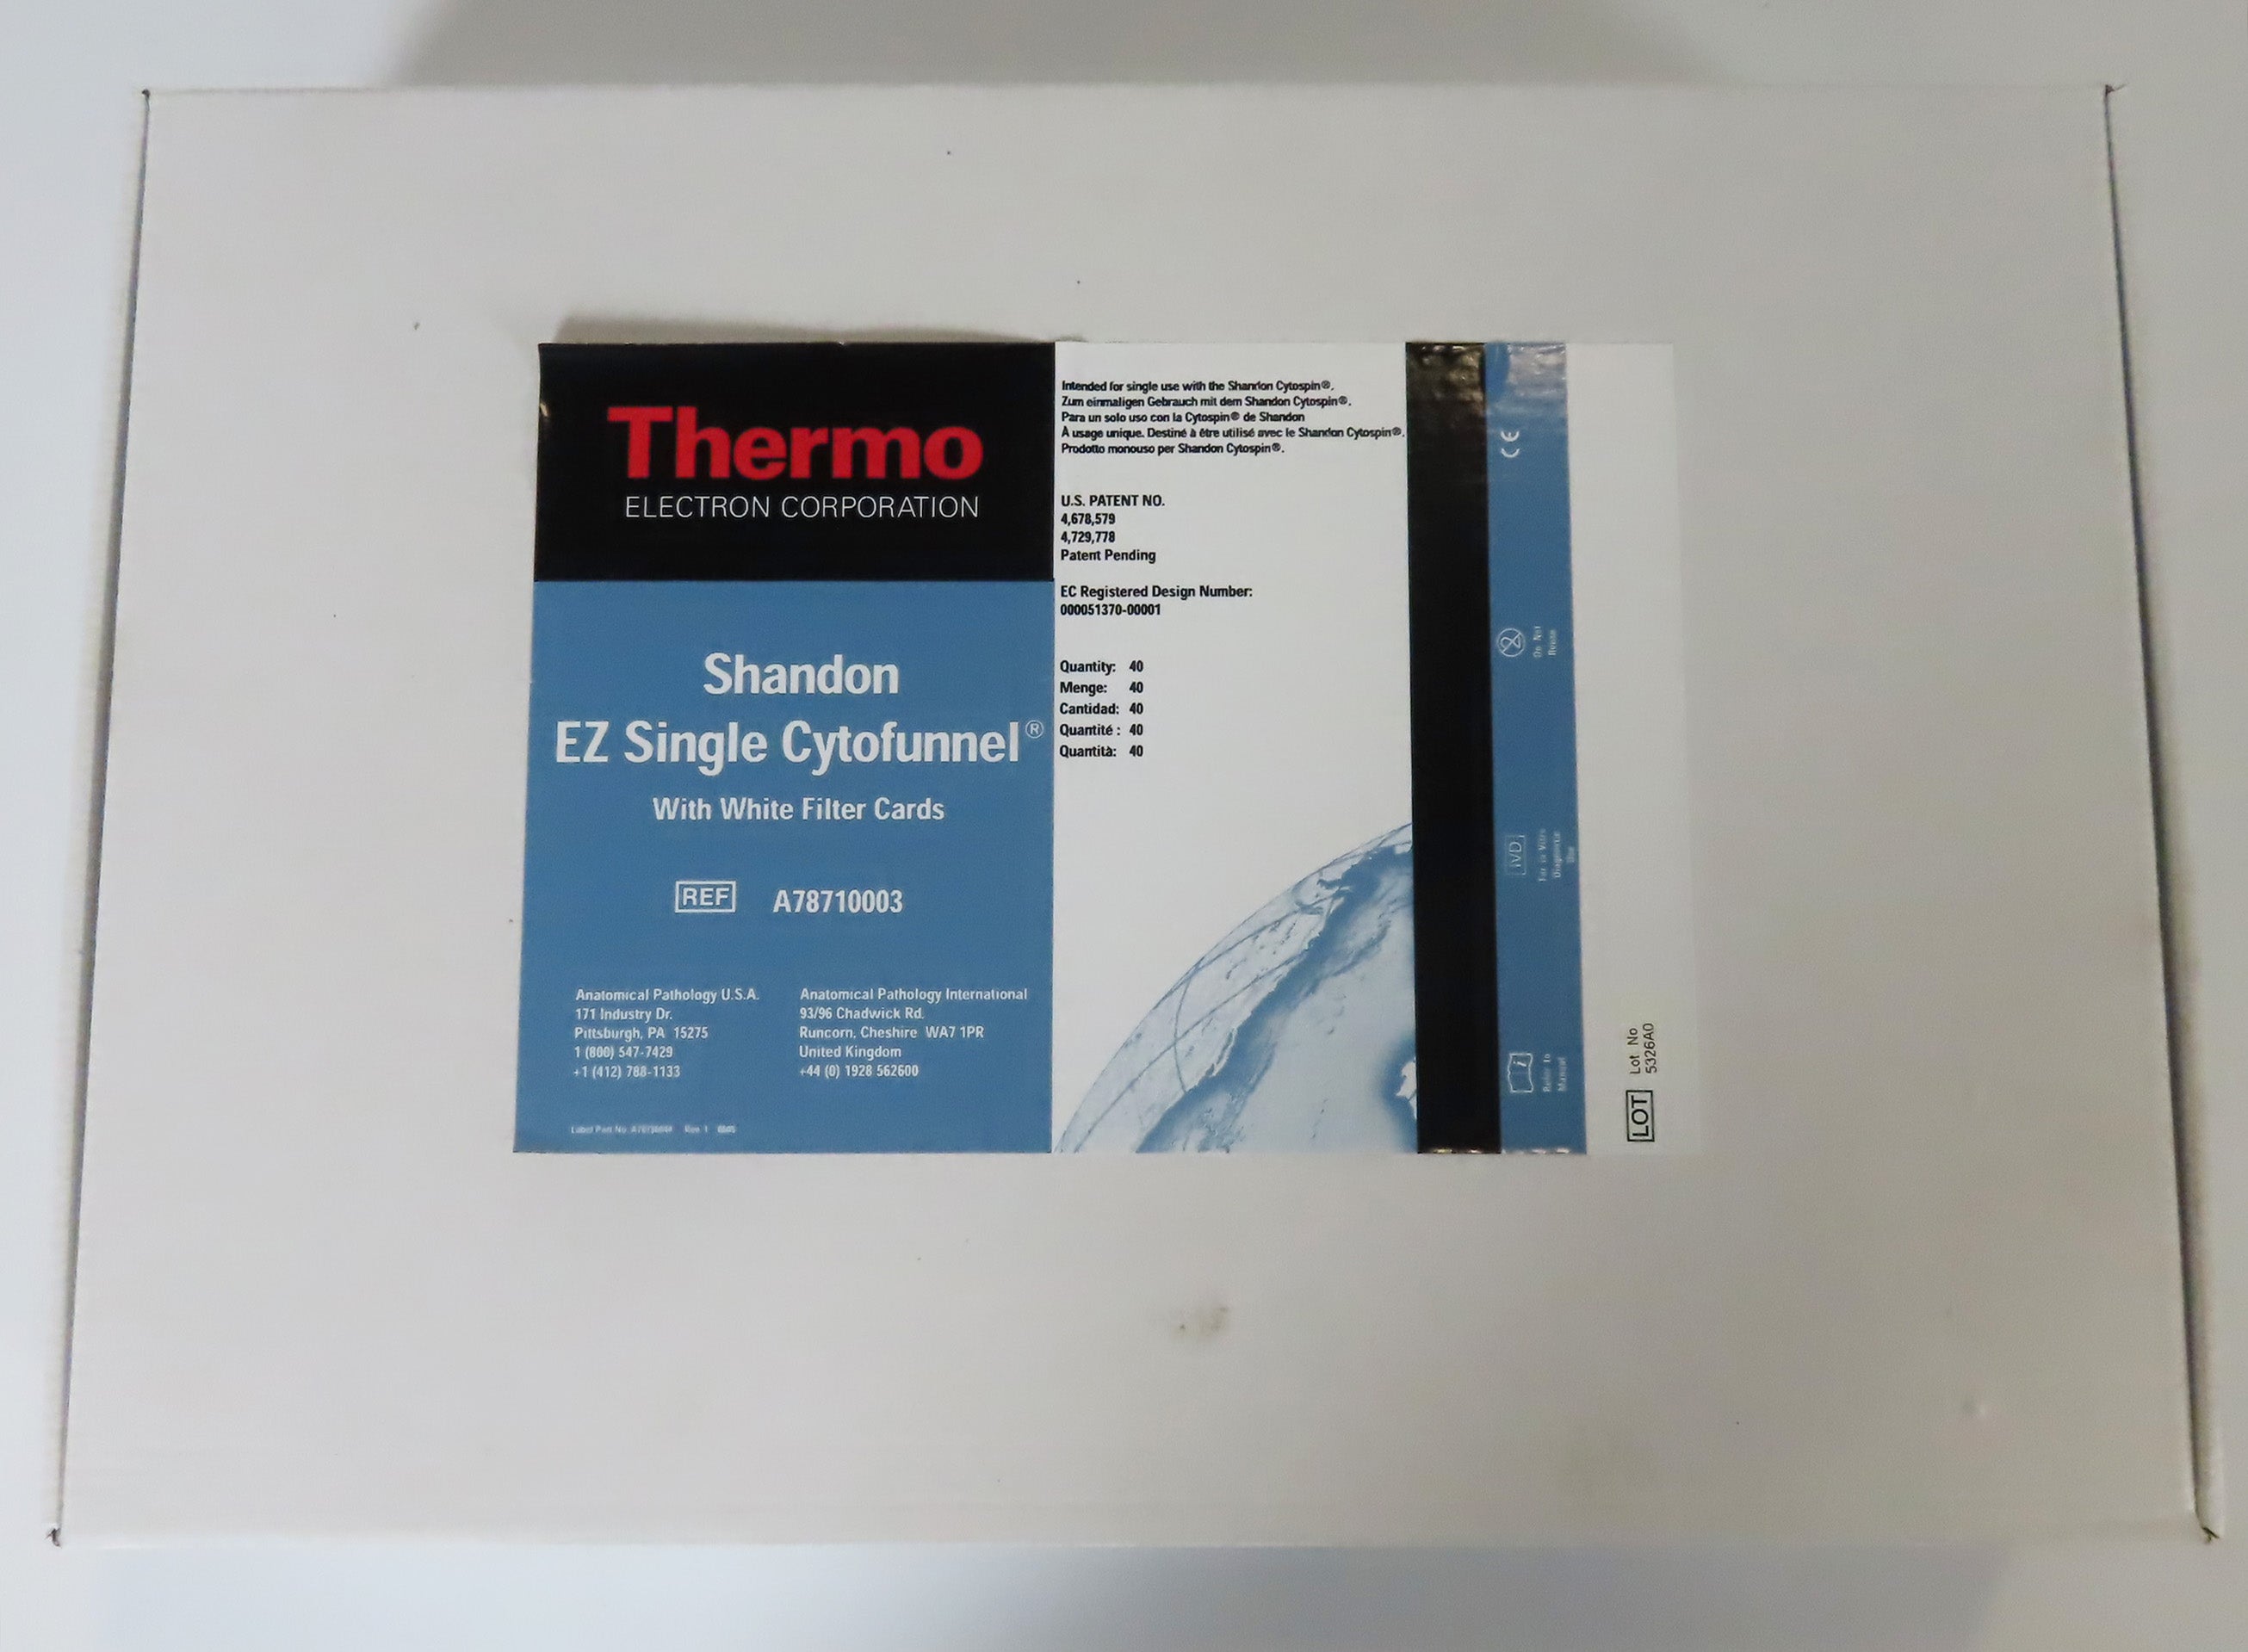 Thermo Shandon E2 Single Cytofunnel w/ White Filter Cards